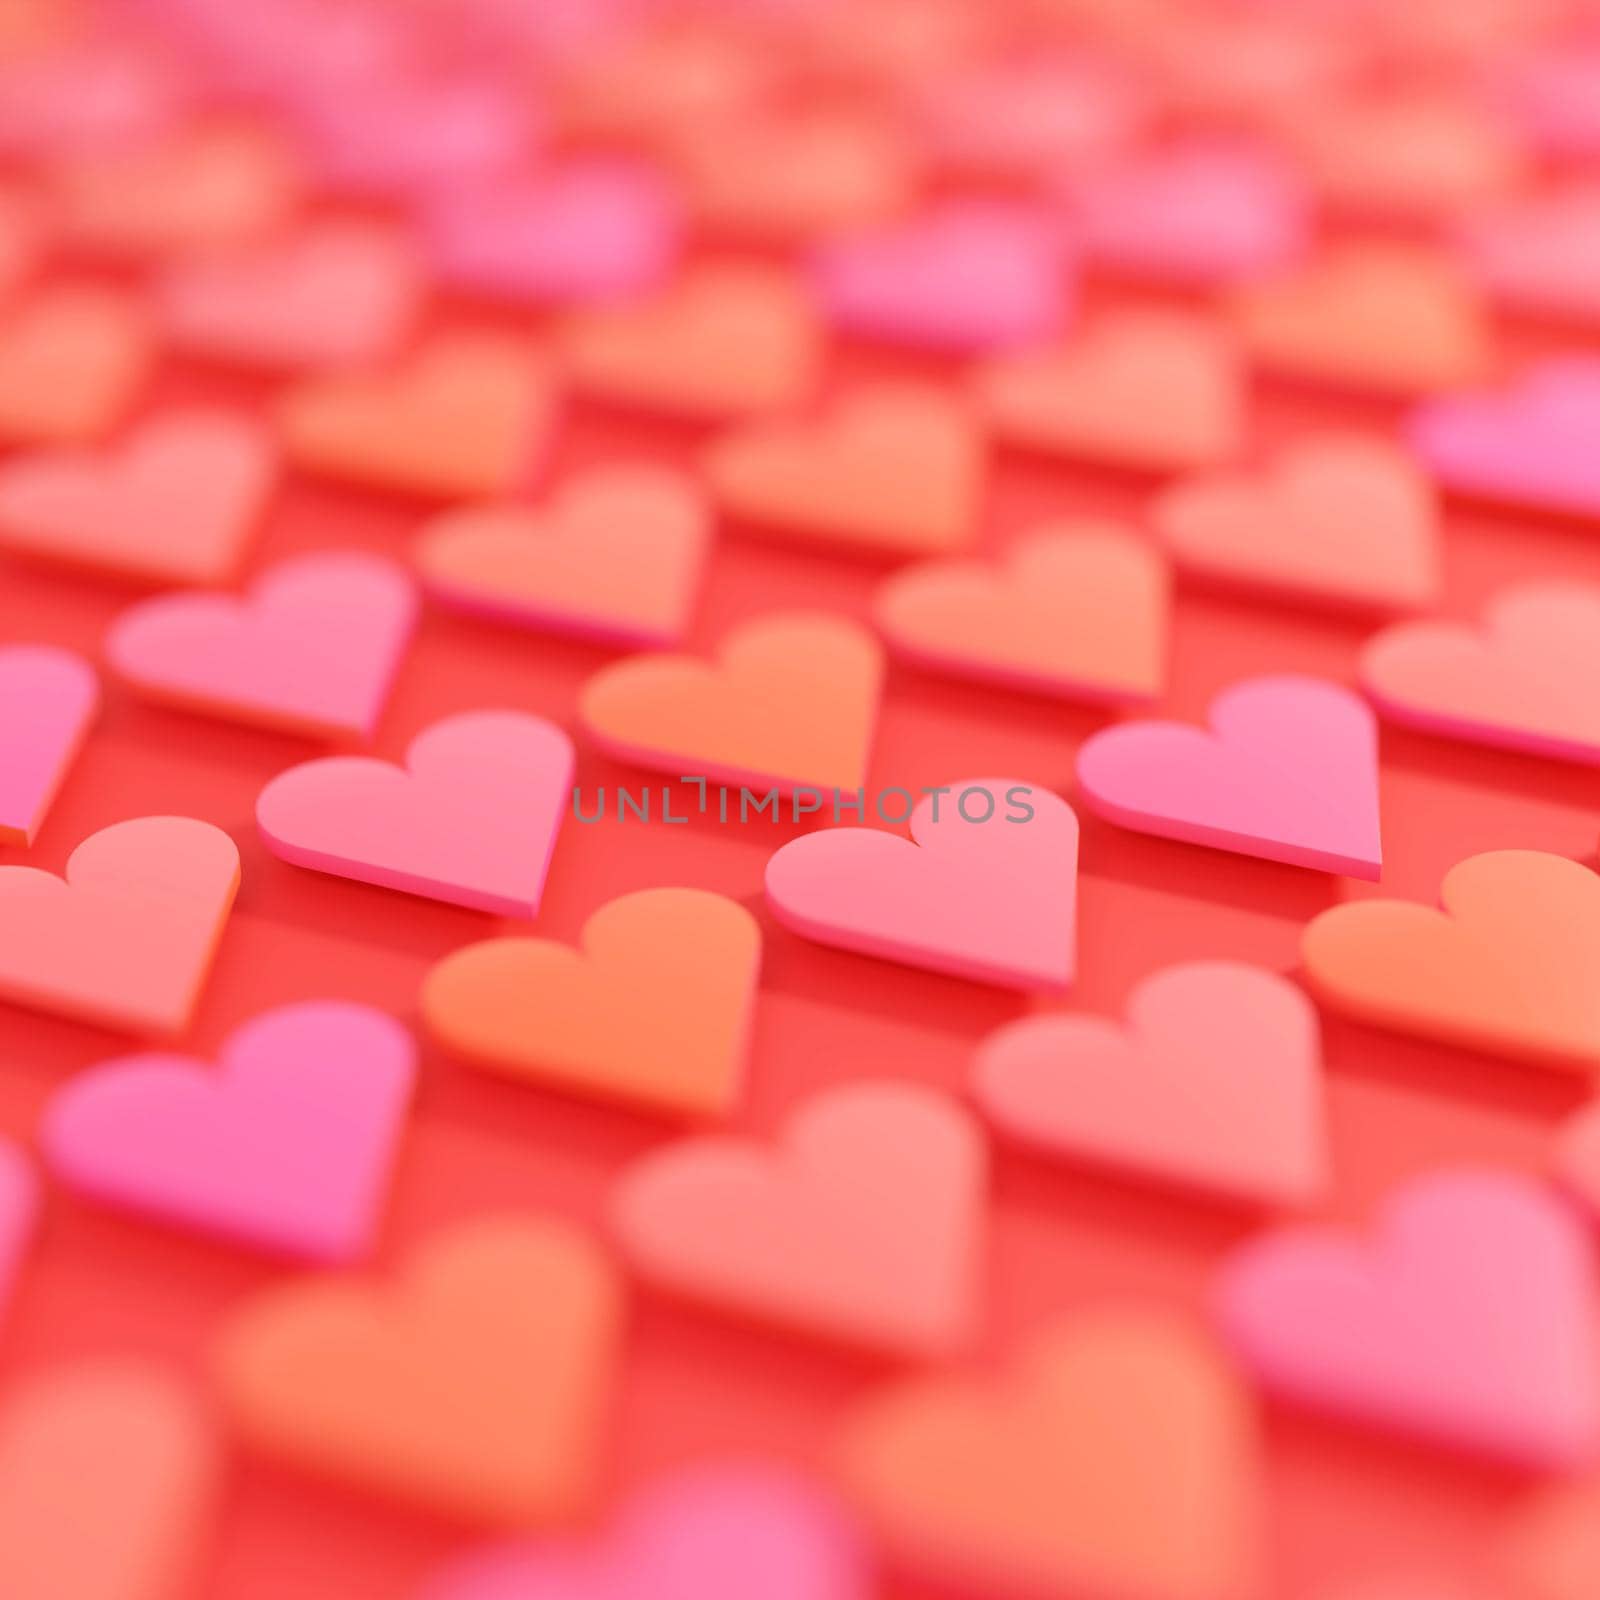 Red and pink hearts in a repeating pattern on red  background with subtle shadows. Digital render.